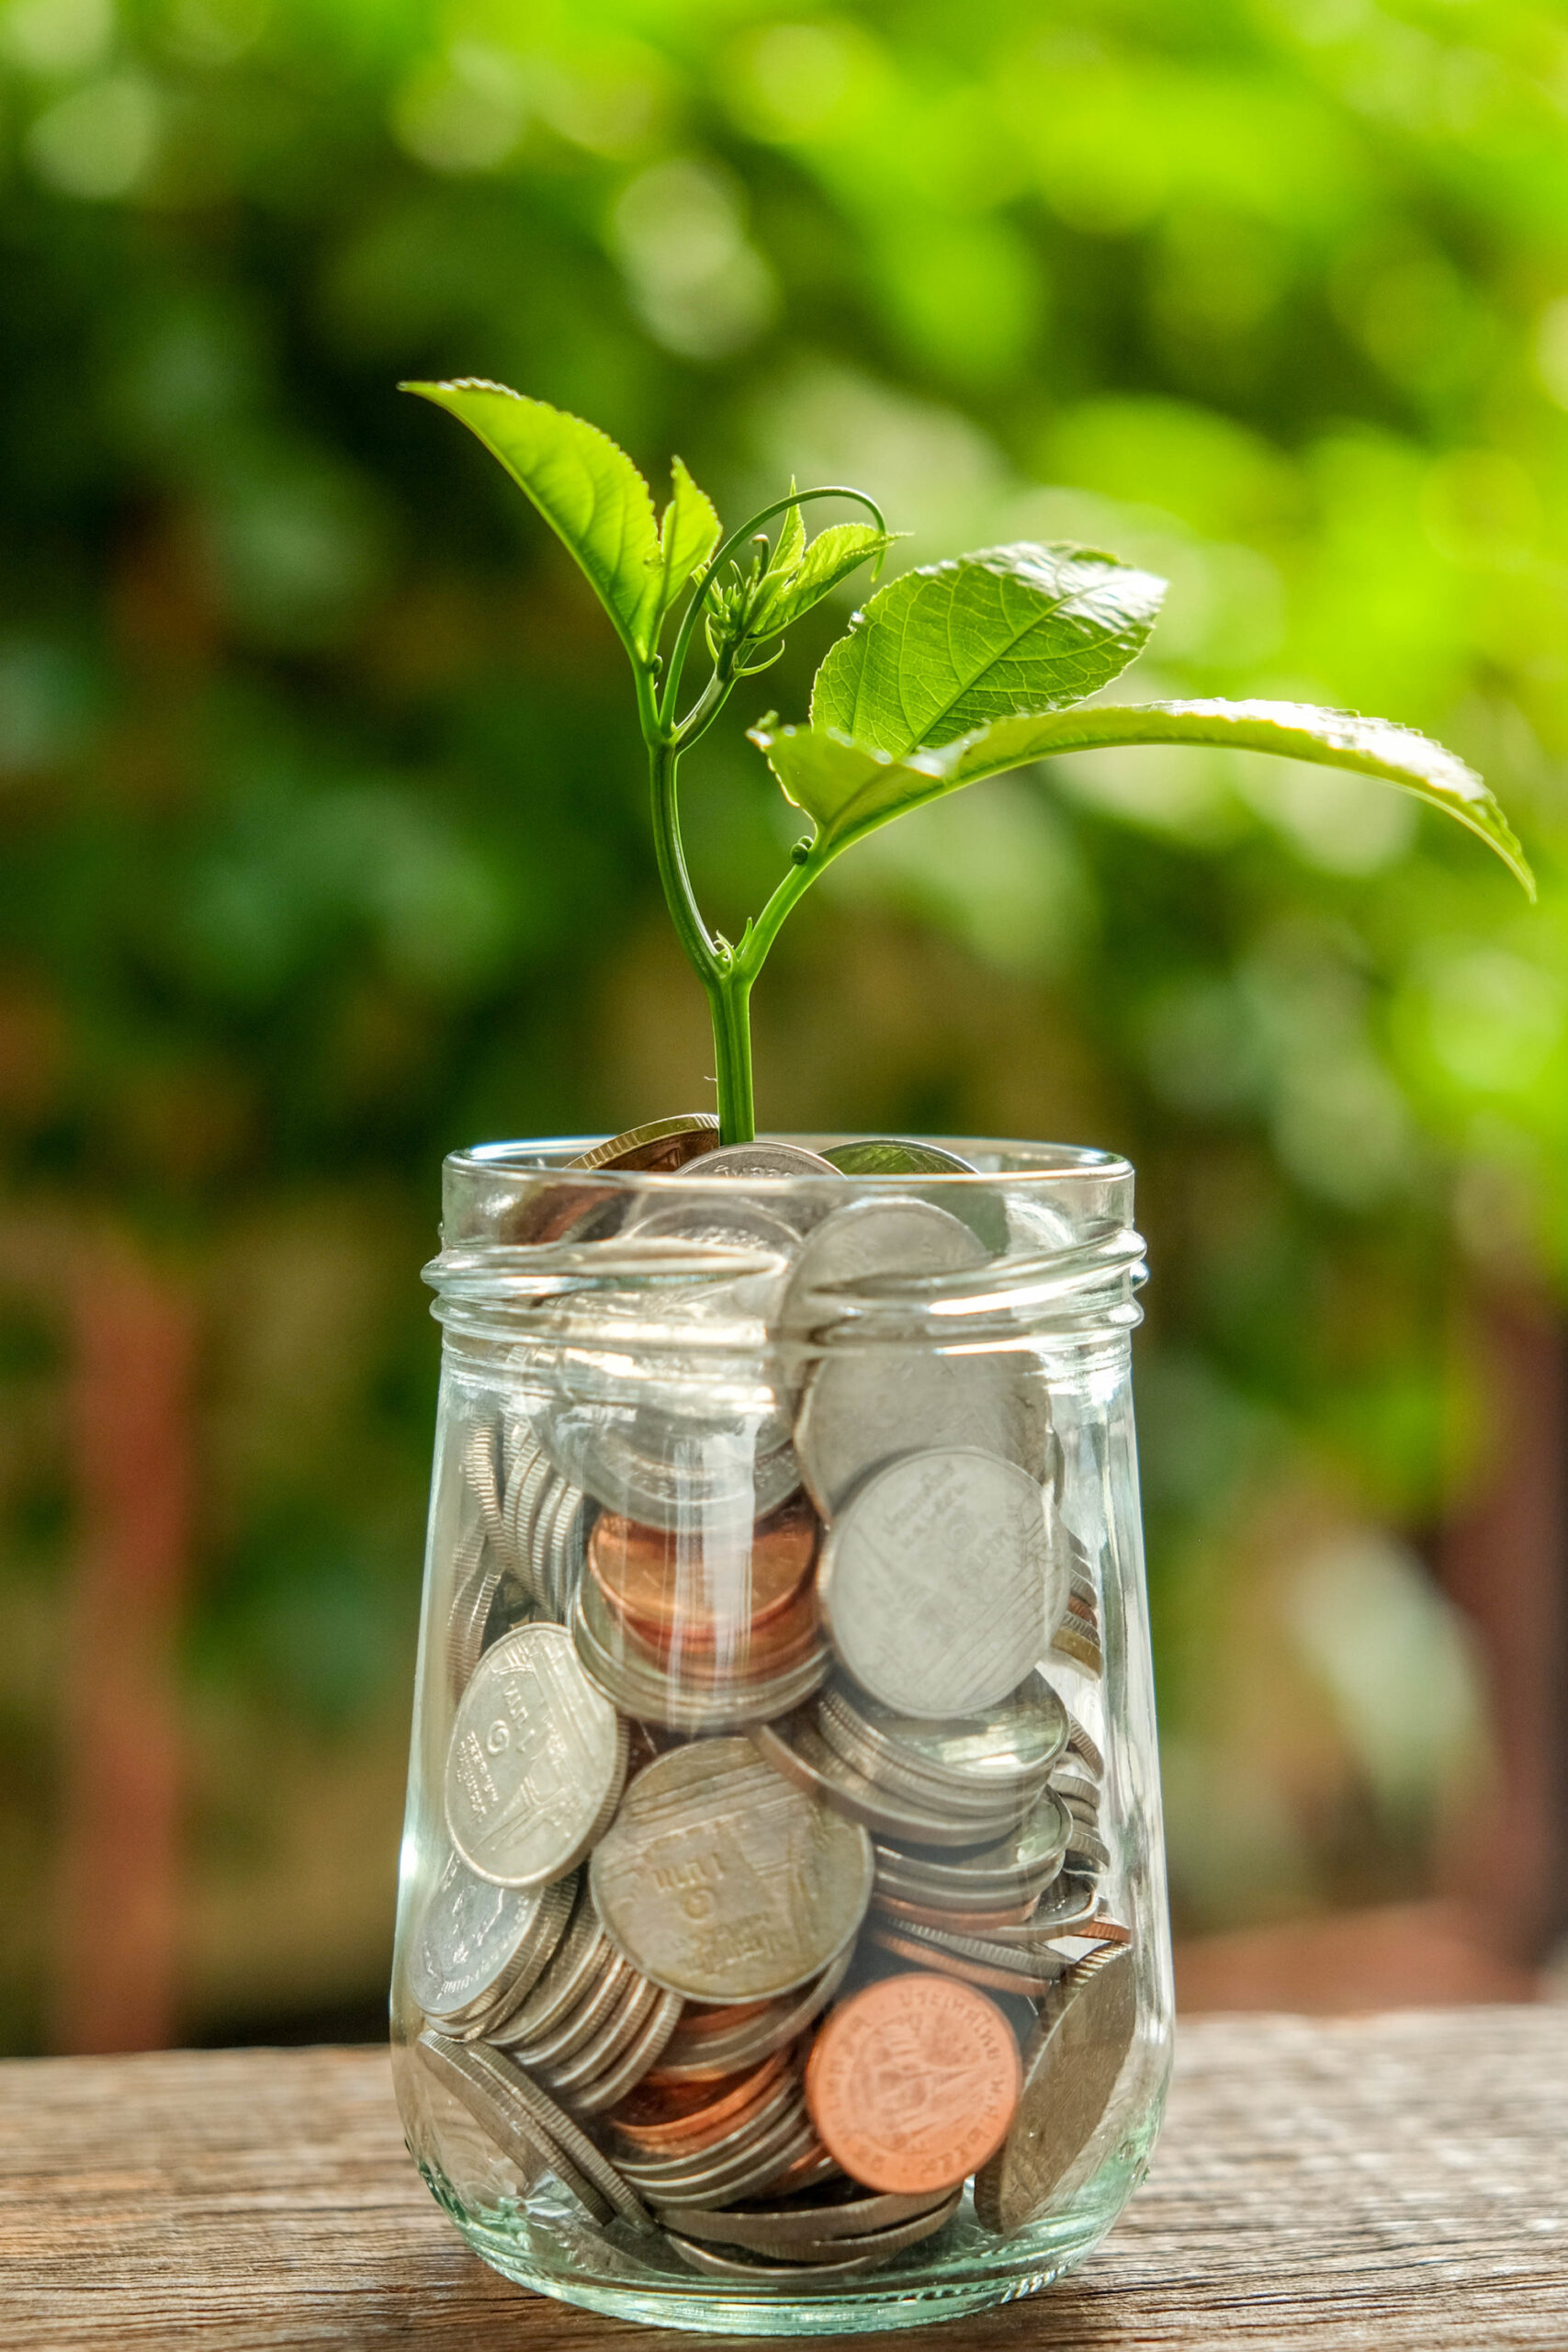 Plant growing out of jar of coins